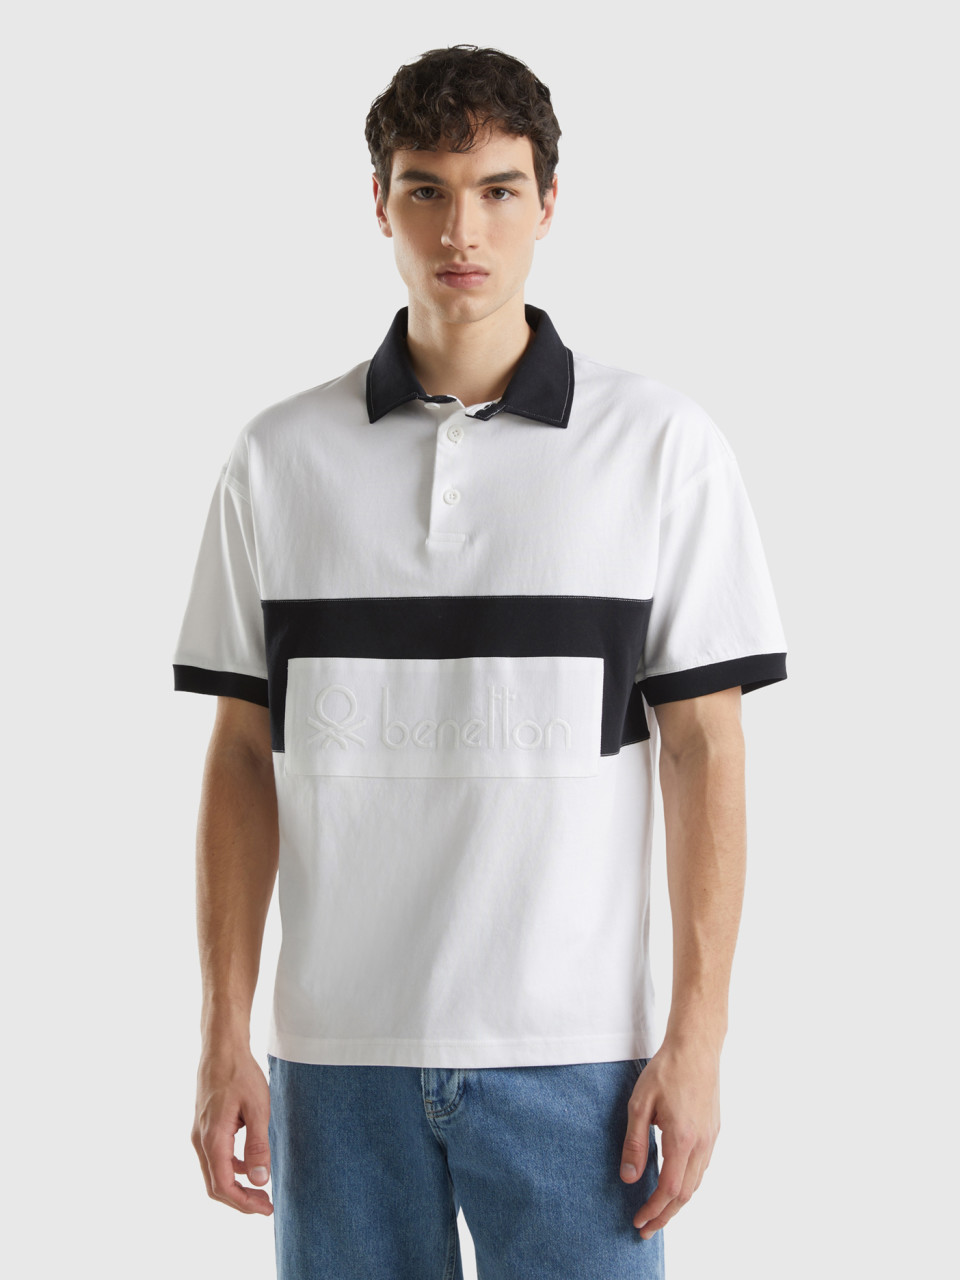 Benetton, Black And White Rugby Polo, Multi-color, Men